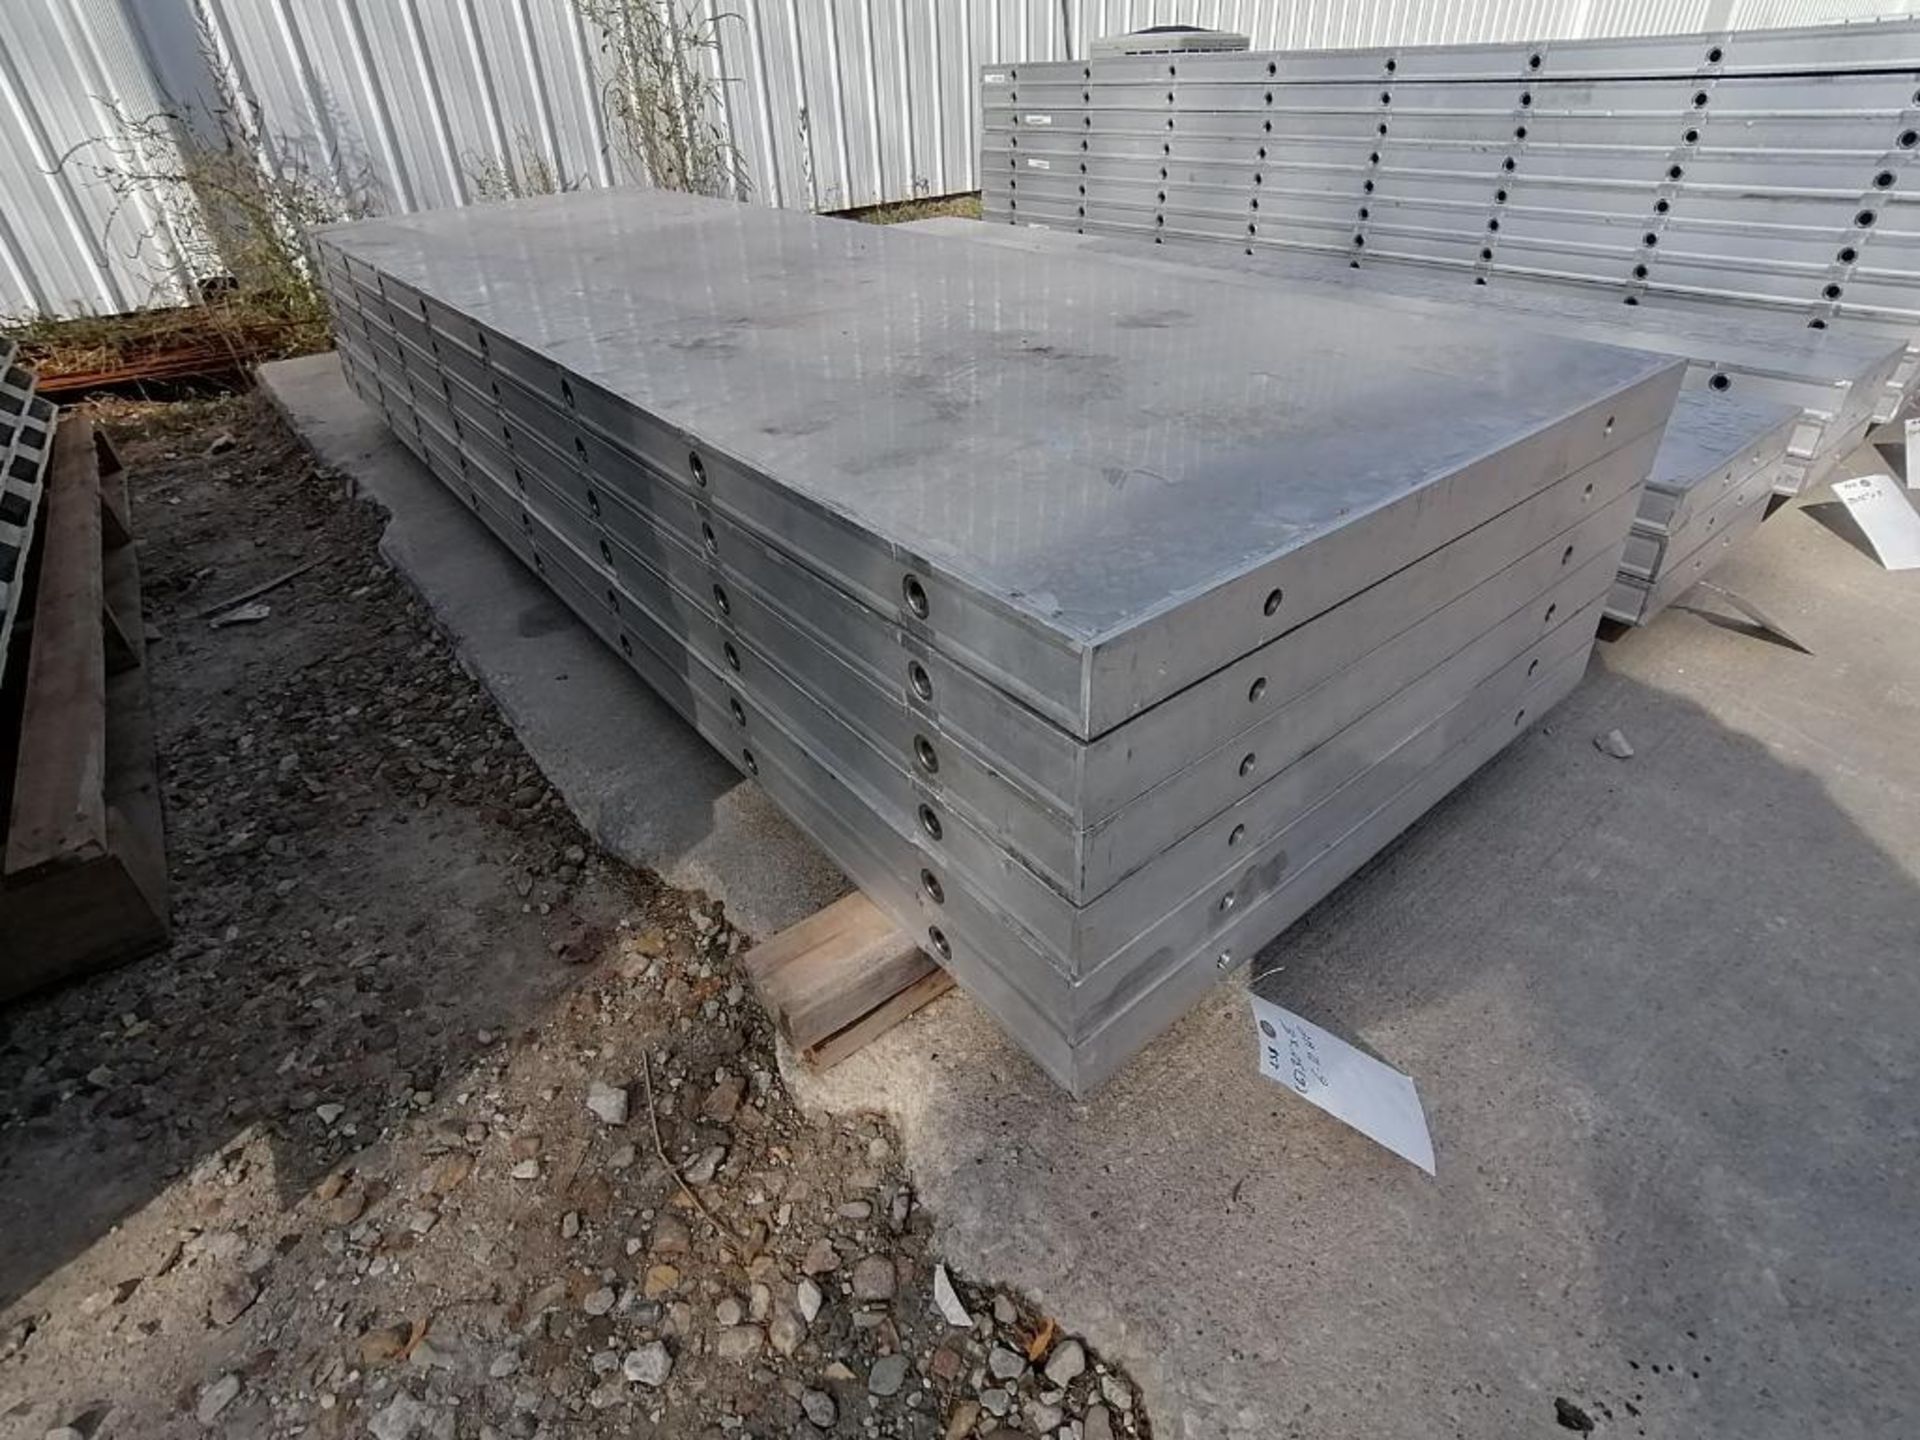 (6) 30" x 8' NEW Badger Smooth Aluminum Concrete Forms 6-12 Hole Pattern. Located in Mt. Pleasant,